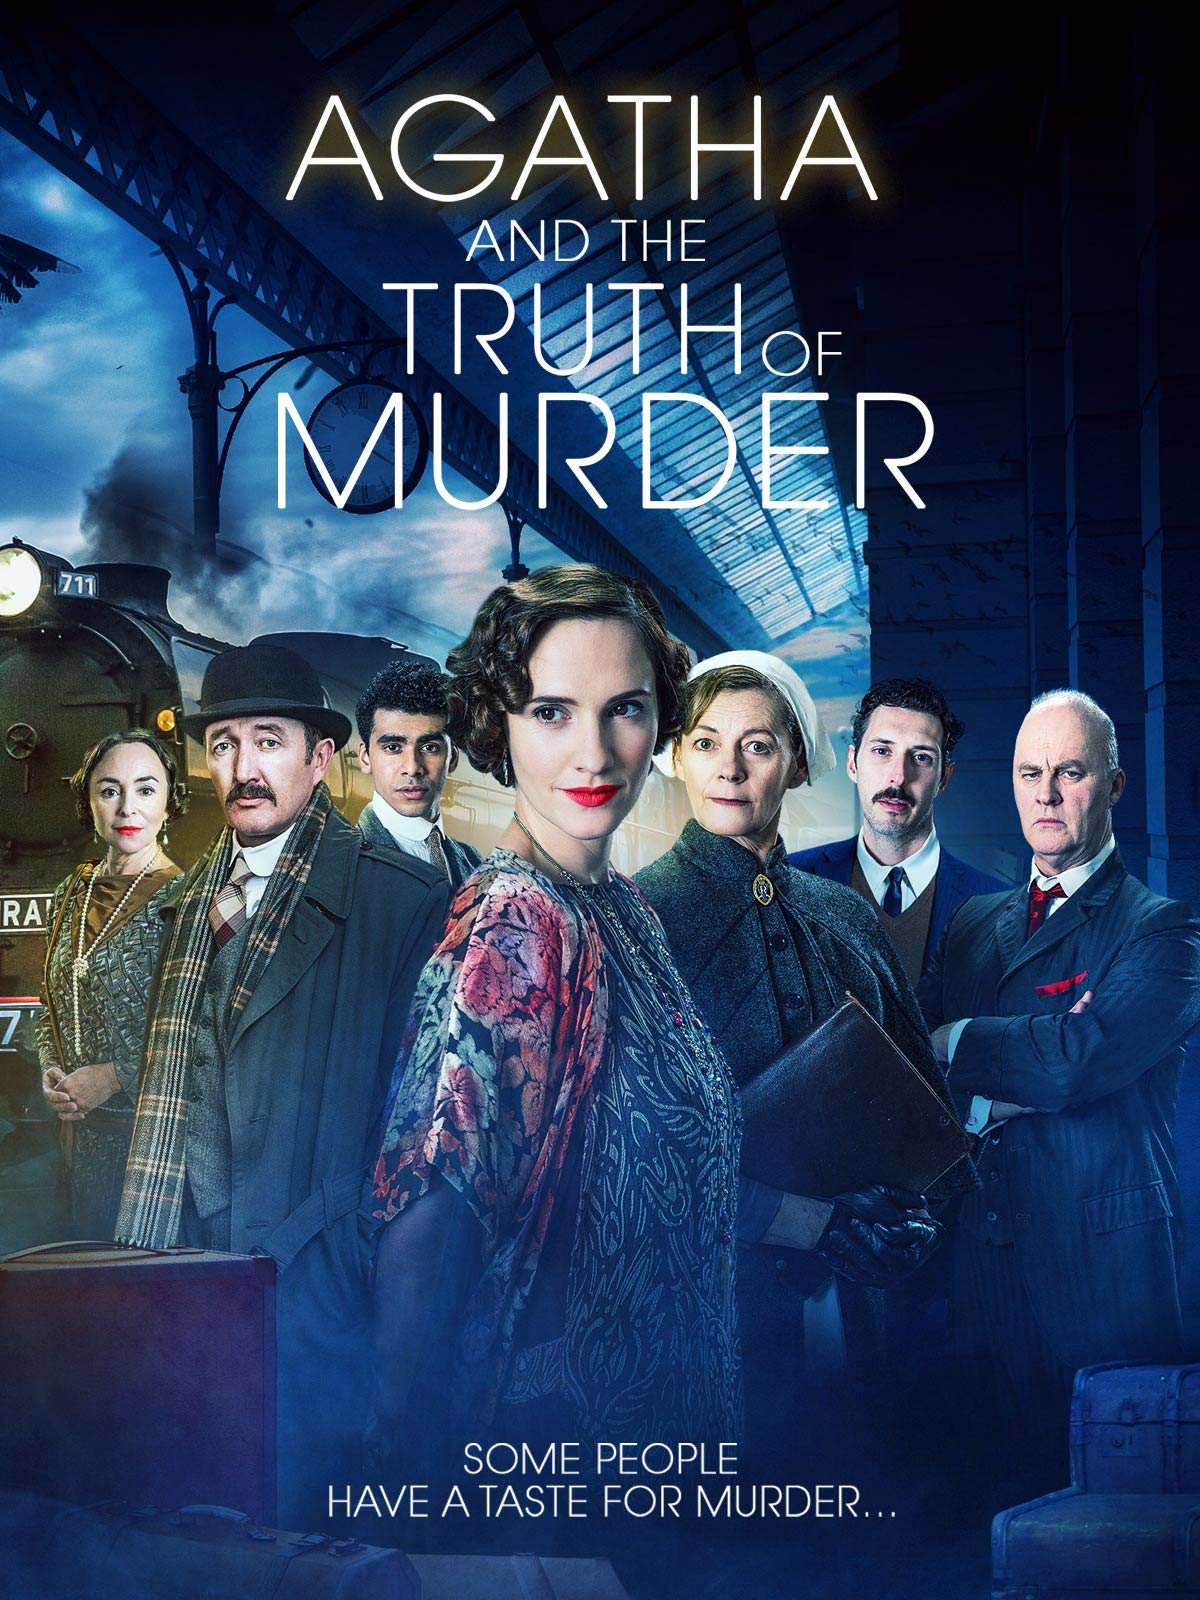 Movie Reviews for Writers: Agatha and the Truth of Murder